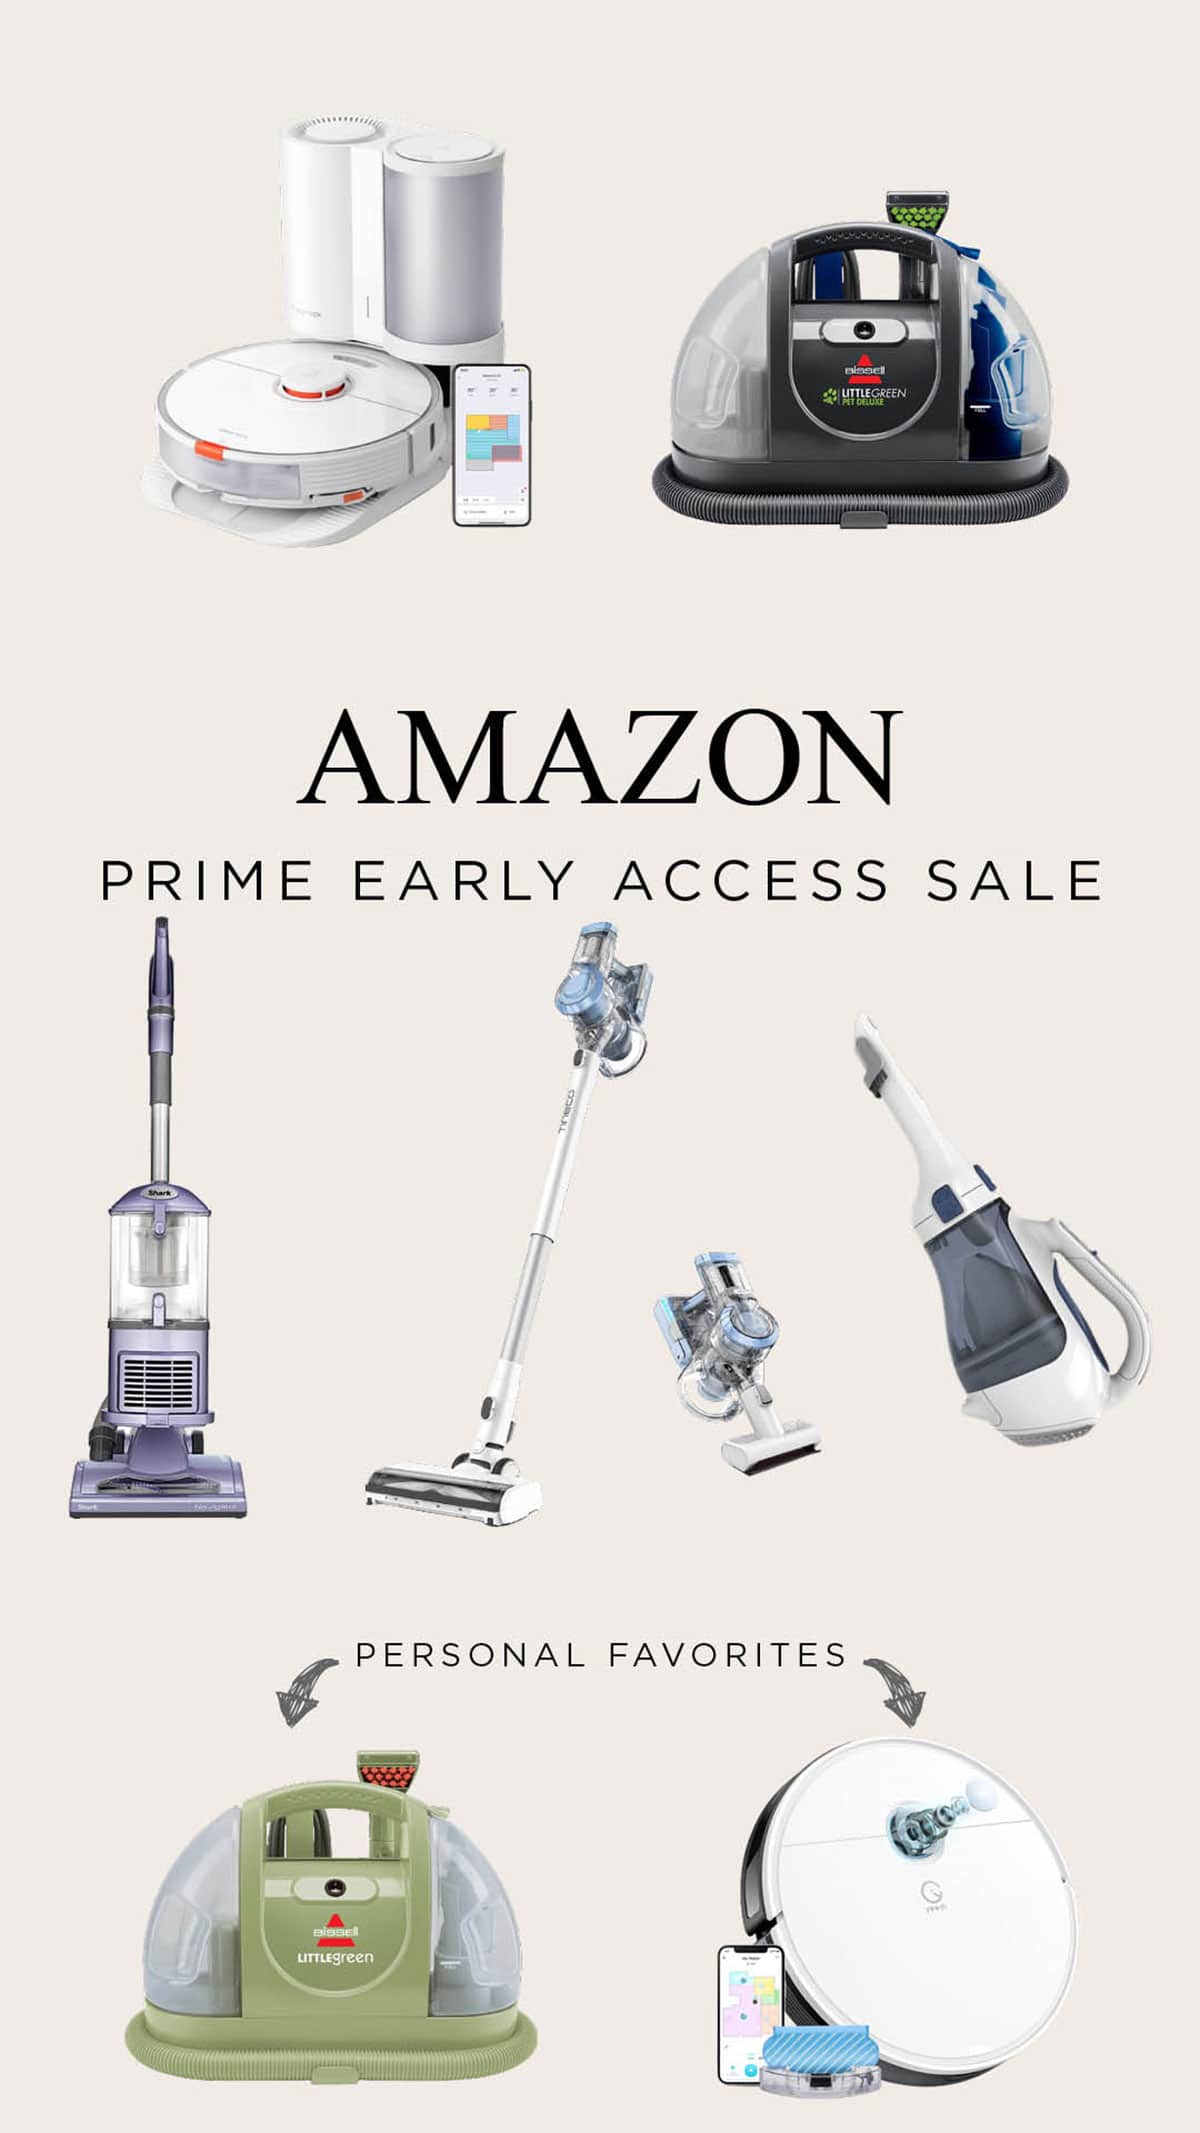 Amazon Prime Early Access Sale best of vacuums